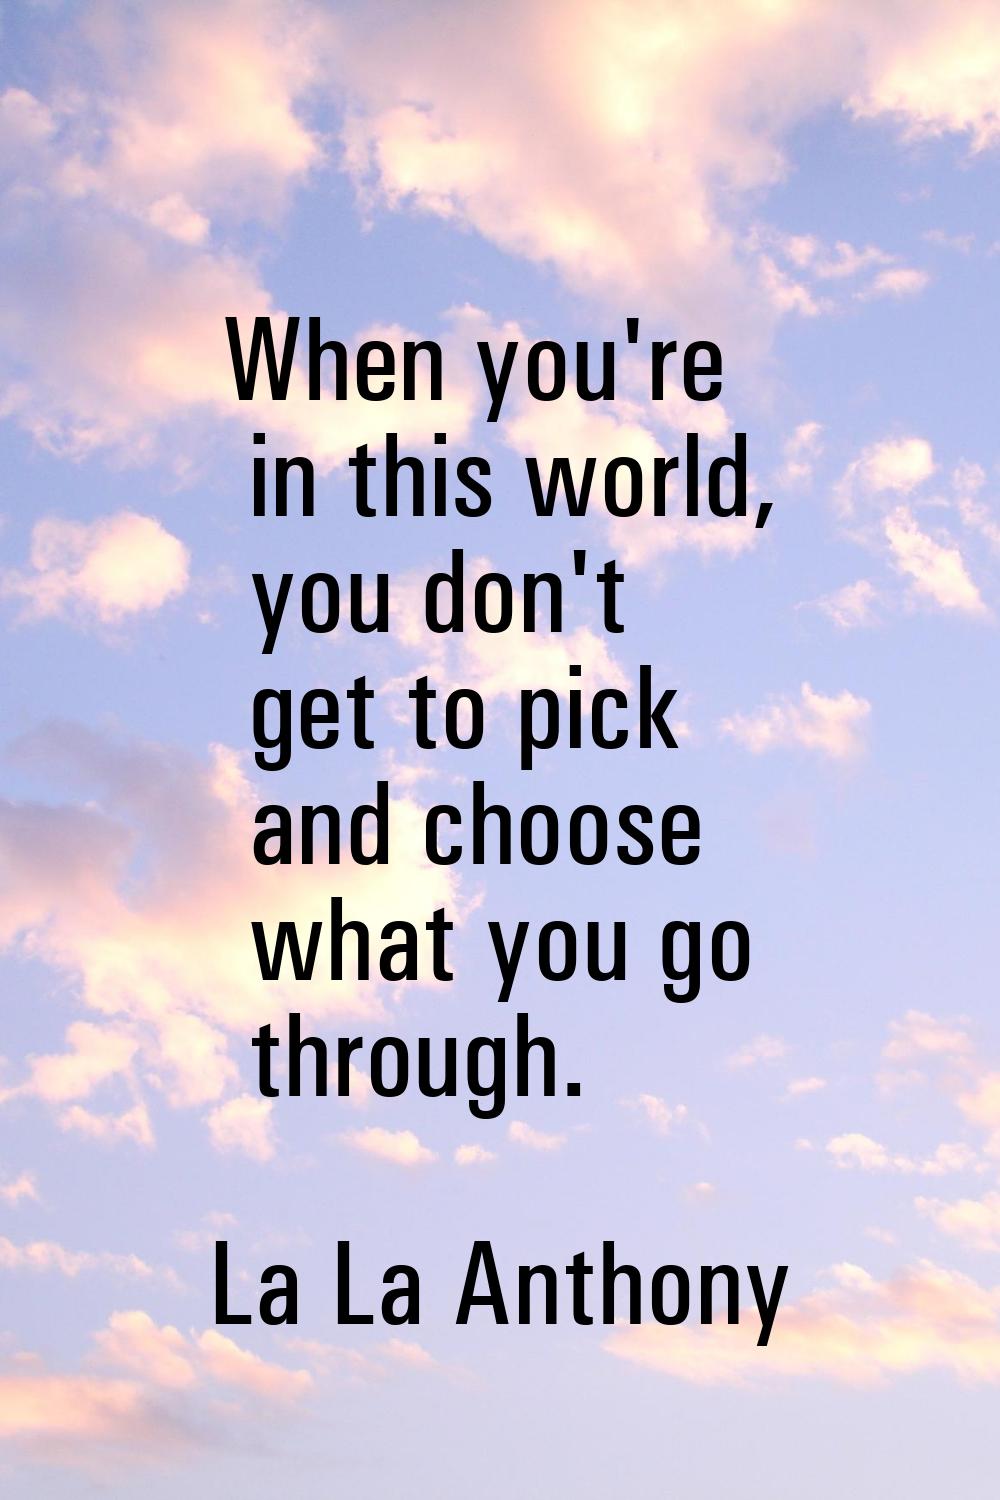 When you're in this world, you don't get to pick and choose what you go through.